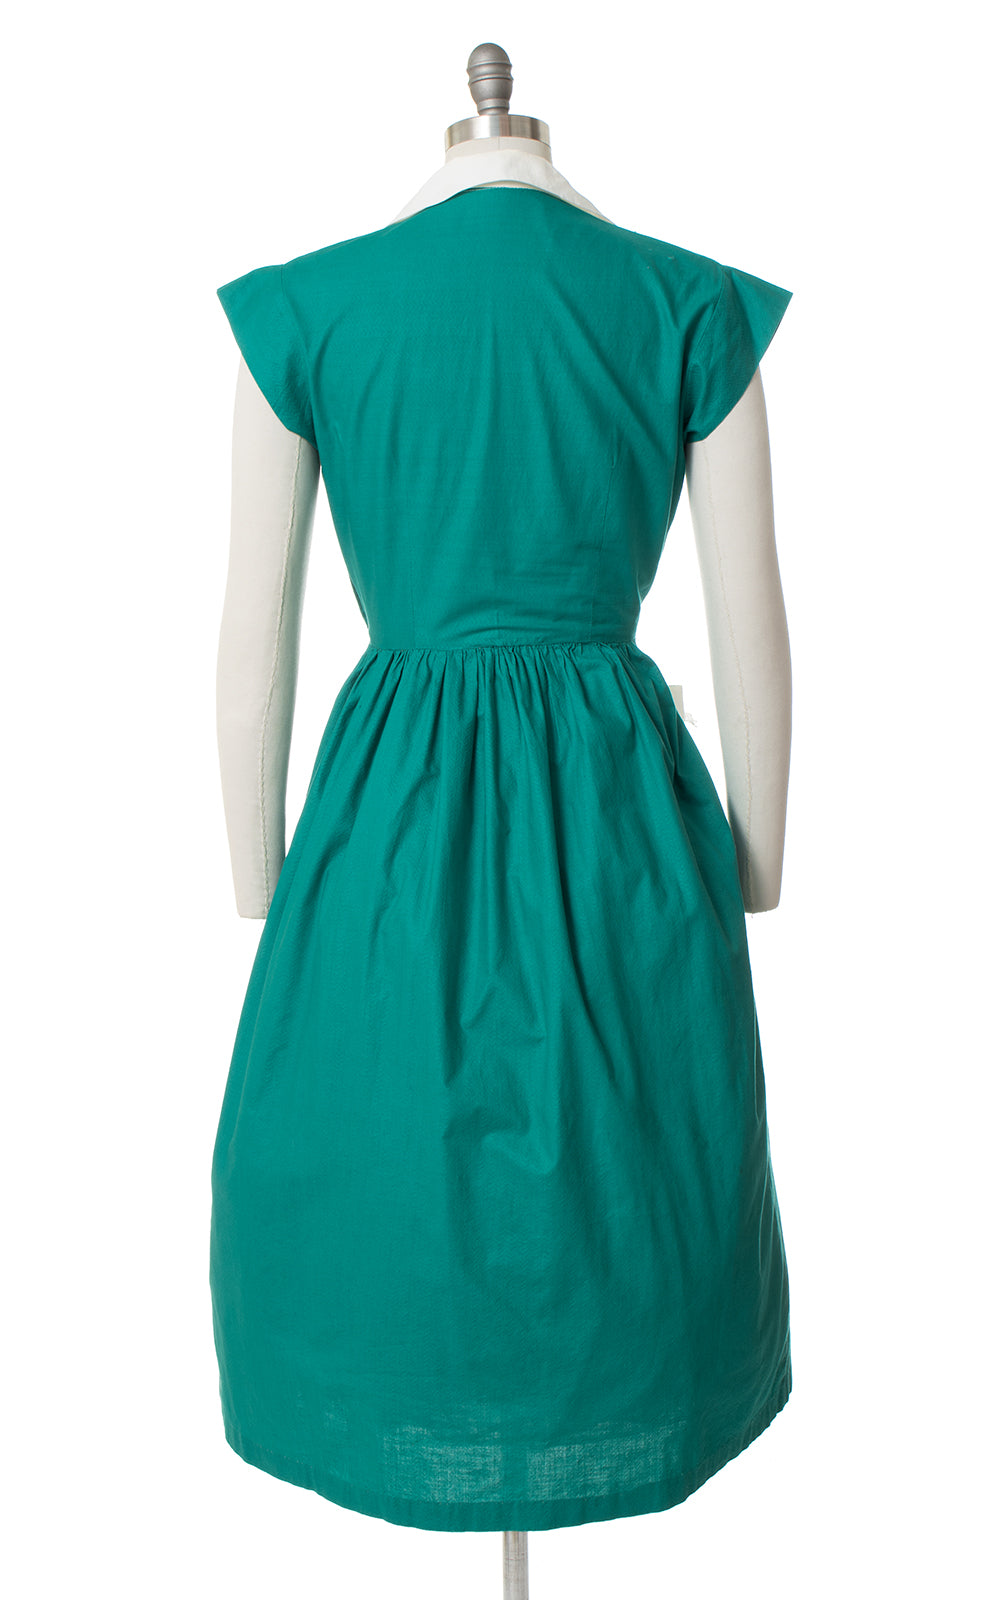 1940s Green Cotton Floral Appliqué Day Dress with Pockets